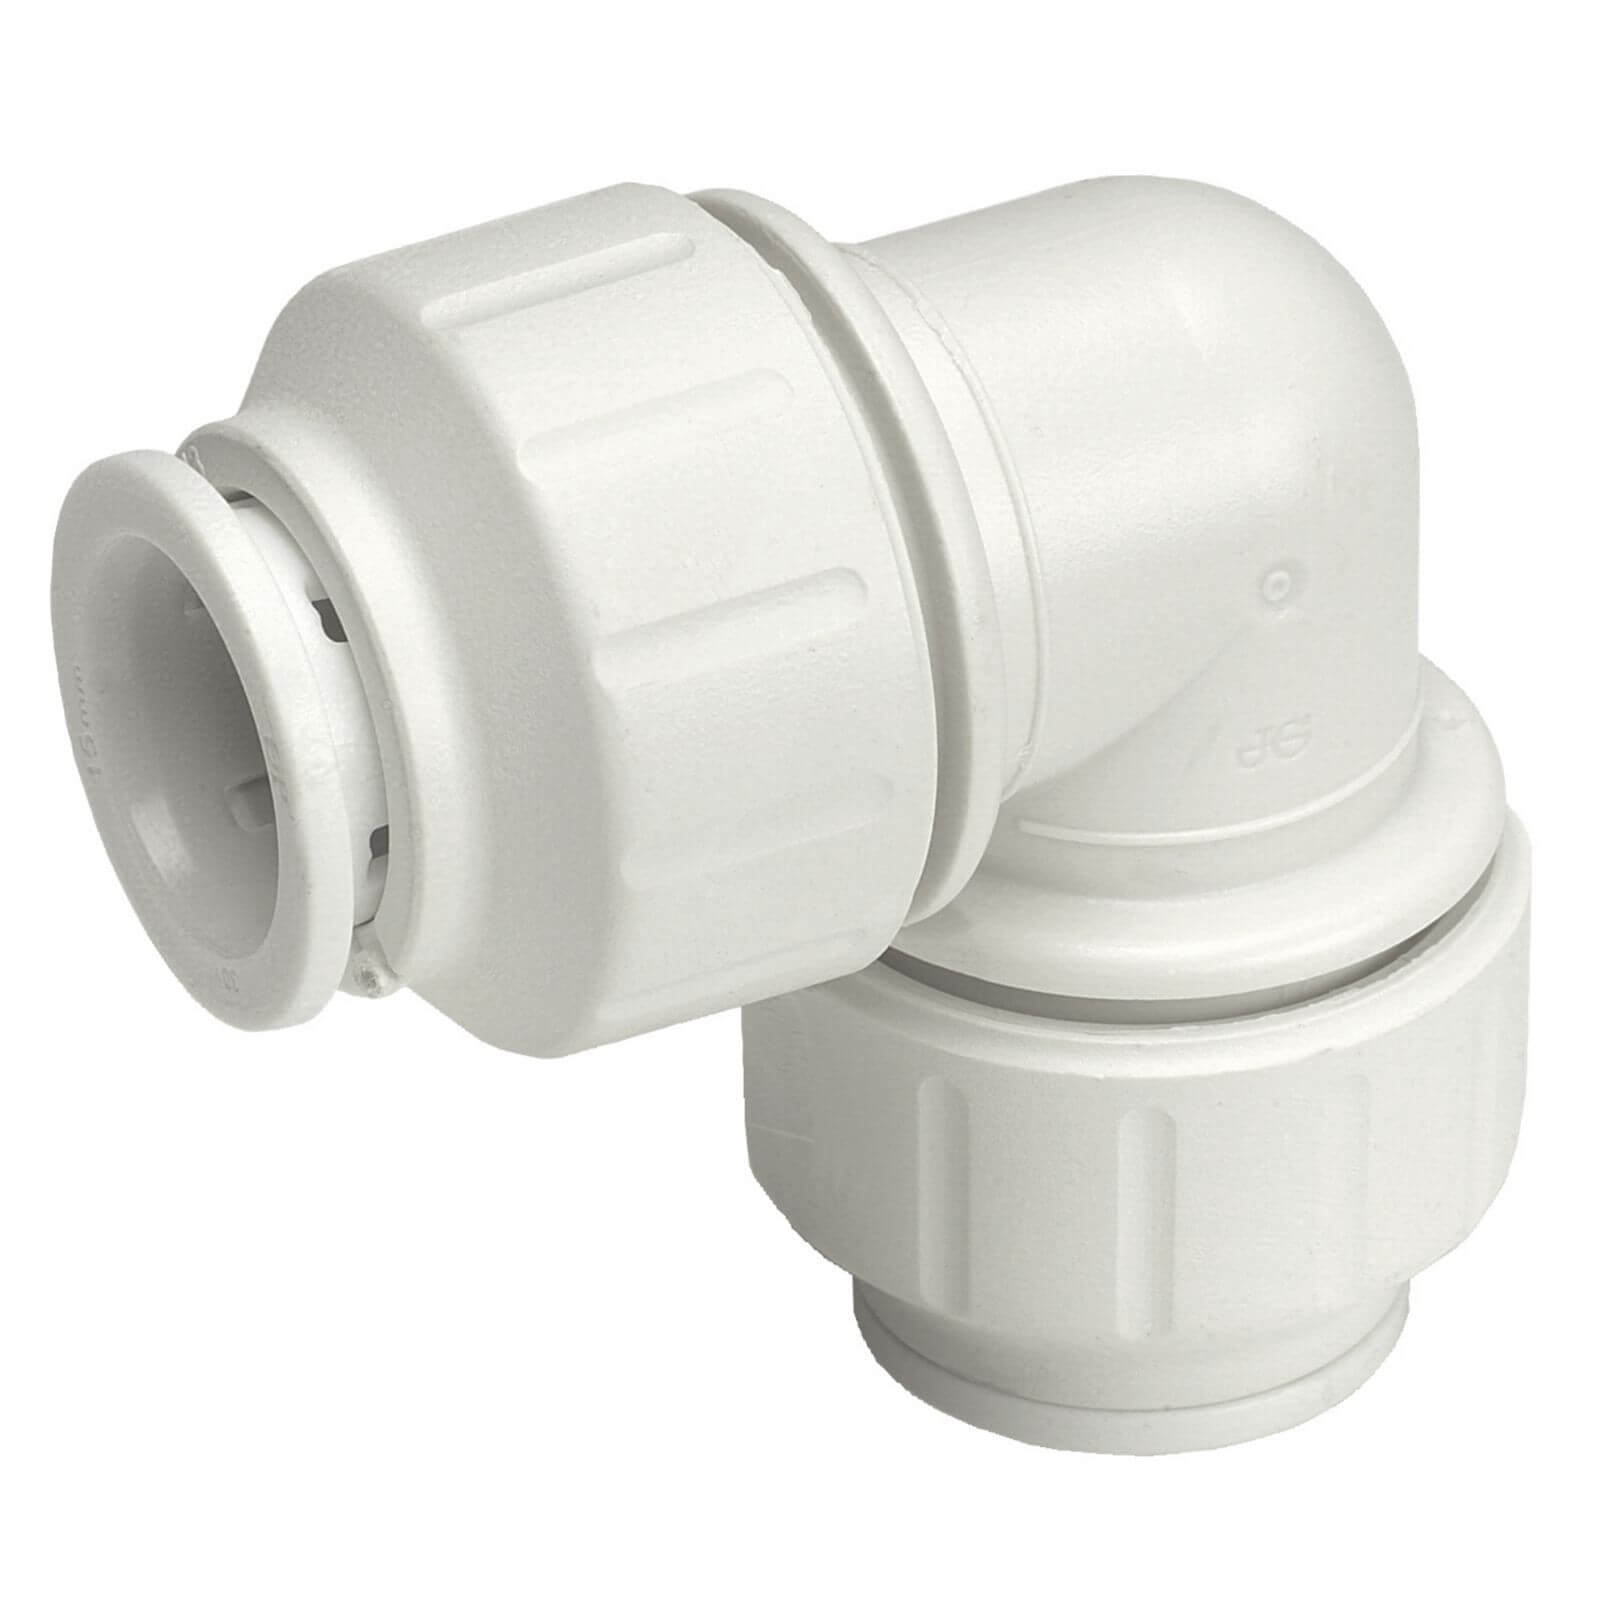 Photo of Jg Speedfit Elbow Connector - 15mm - 10 Pack